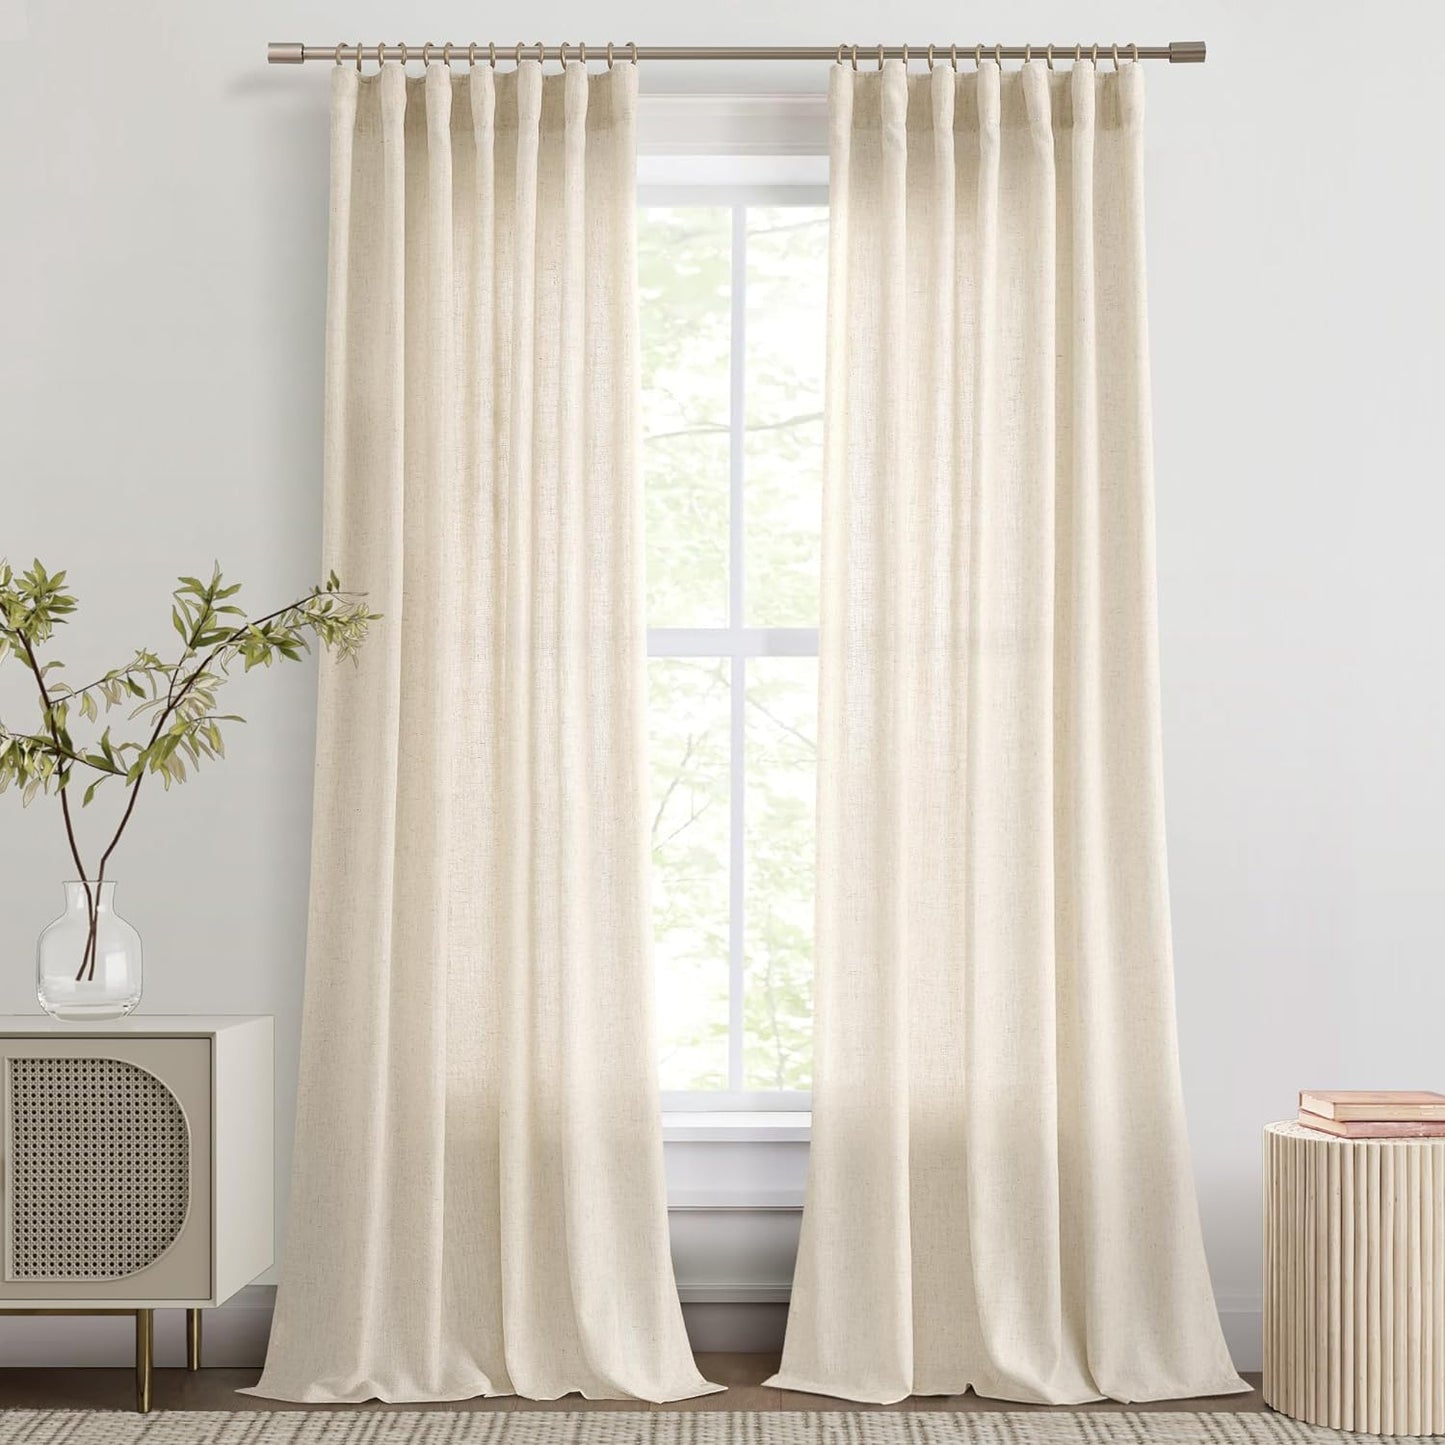 Joywell Natural Linen Cream Curtains 84 Inches Long for Living Room Bedroom Hook Belt Back Tab Pinch Pleated Light Filtering Ivory White Neutral Boho Modern Farmhouse Linen Drapes 84 Length 2 Panels  Joywell Sand Beige 52W X 84L Inch X 2 Panels 